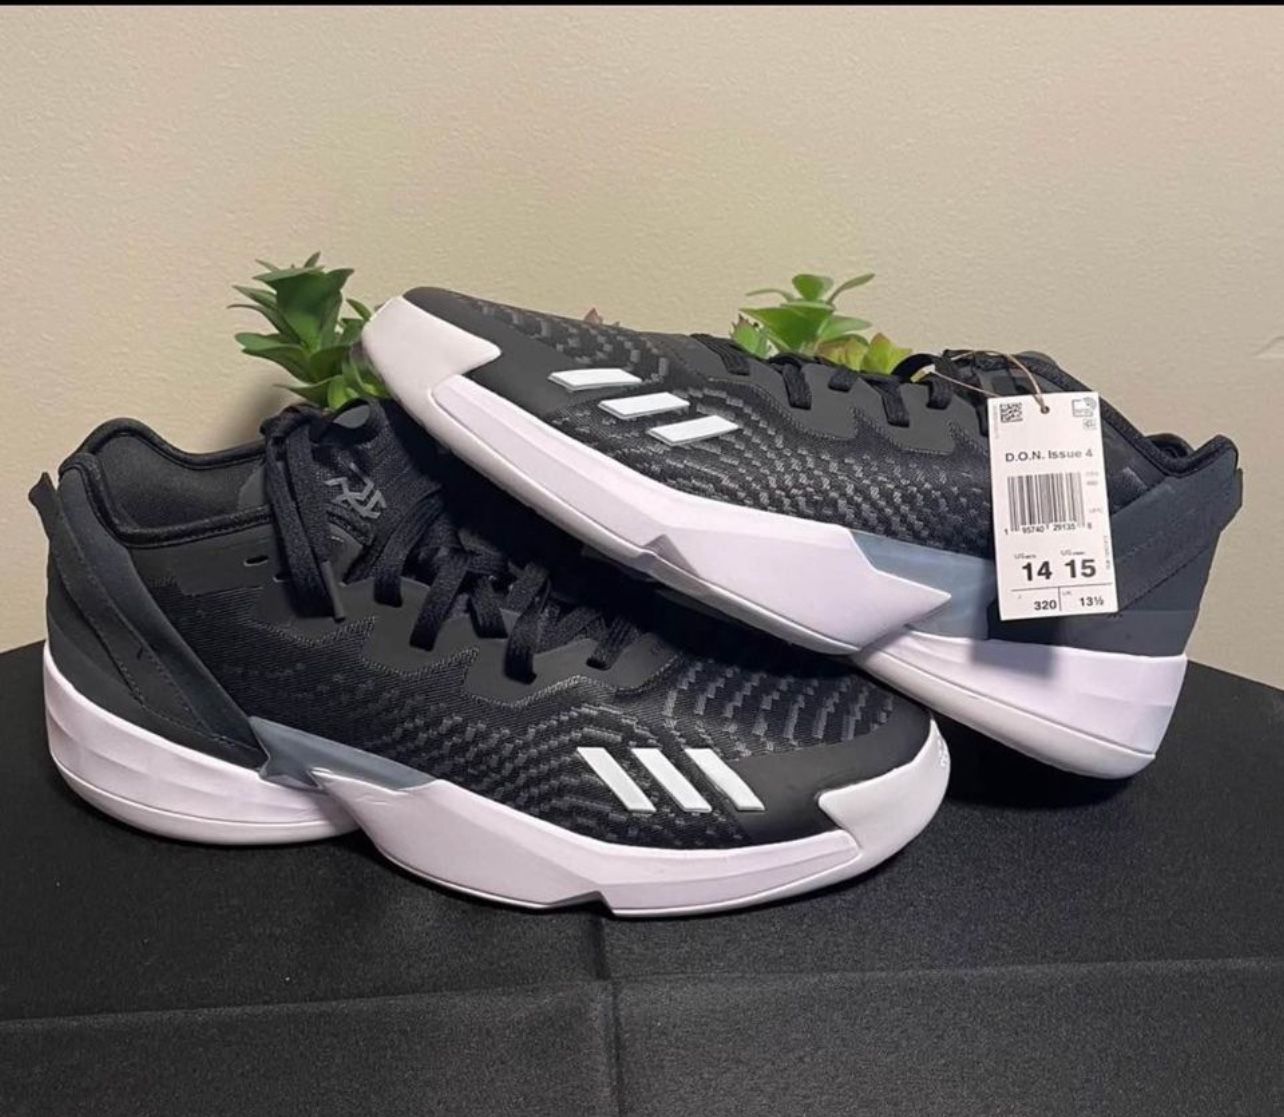 Adidas Basketball Shoes Men’s Size 14 BRAND NEW